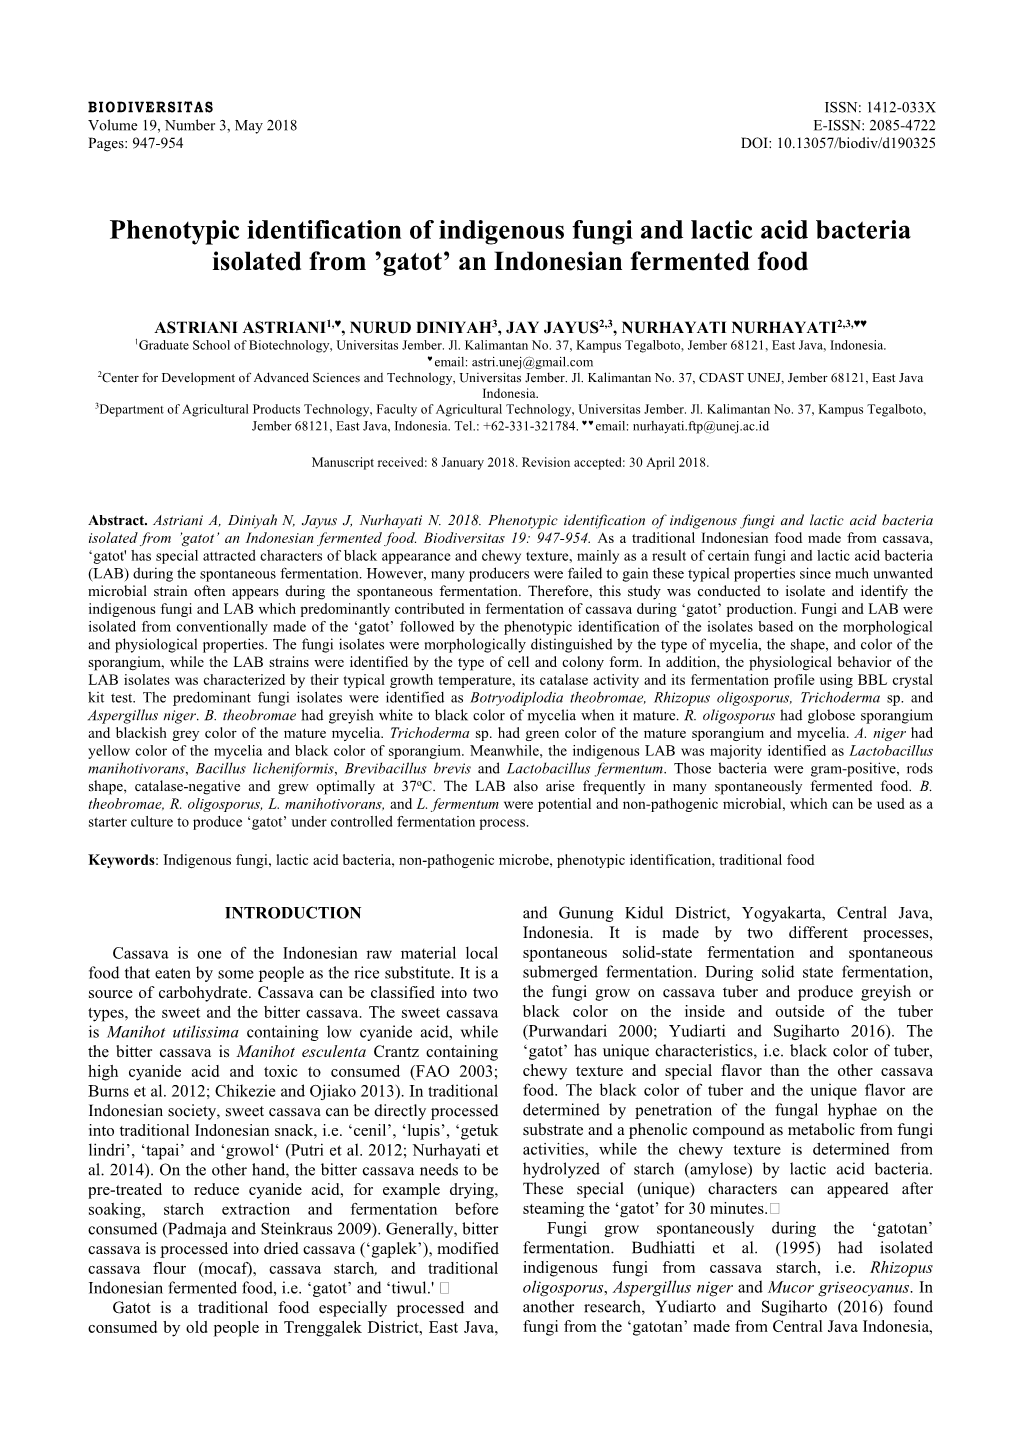 Phenotypic Identification of Indigenous Fungi and Lactic Acid Bacteria Isolated from ’Gatot’ an Indonesian Fermented Food